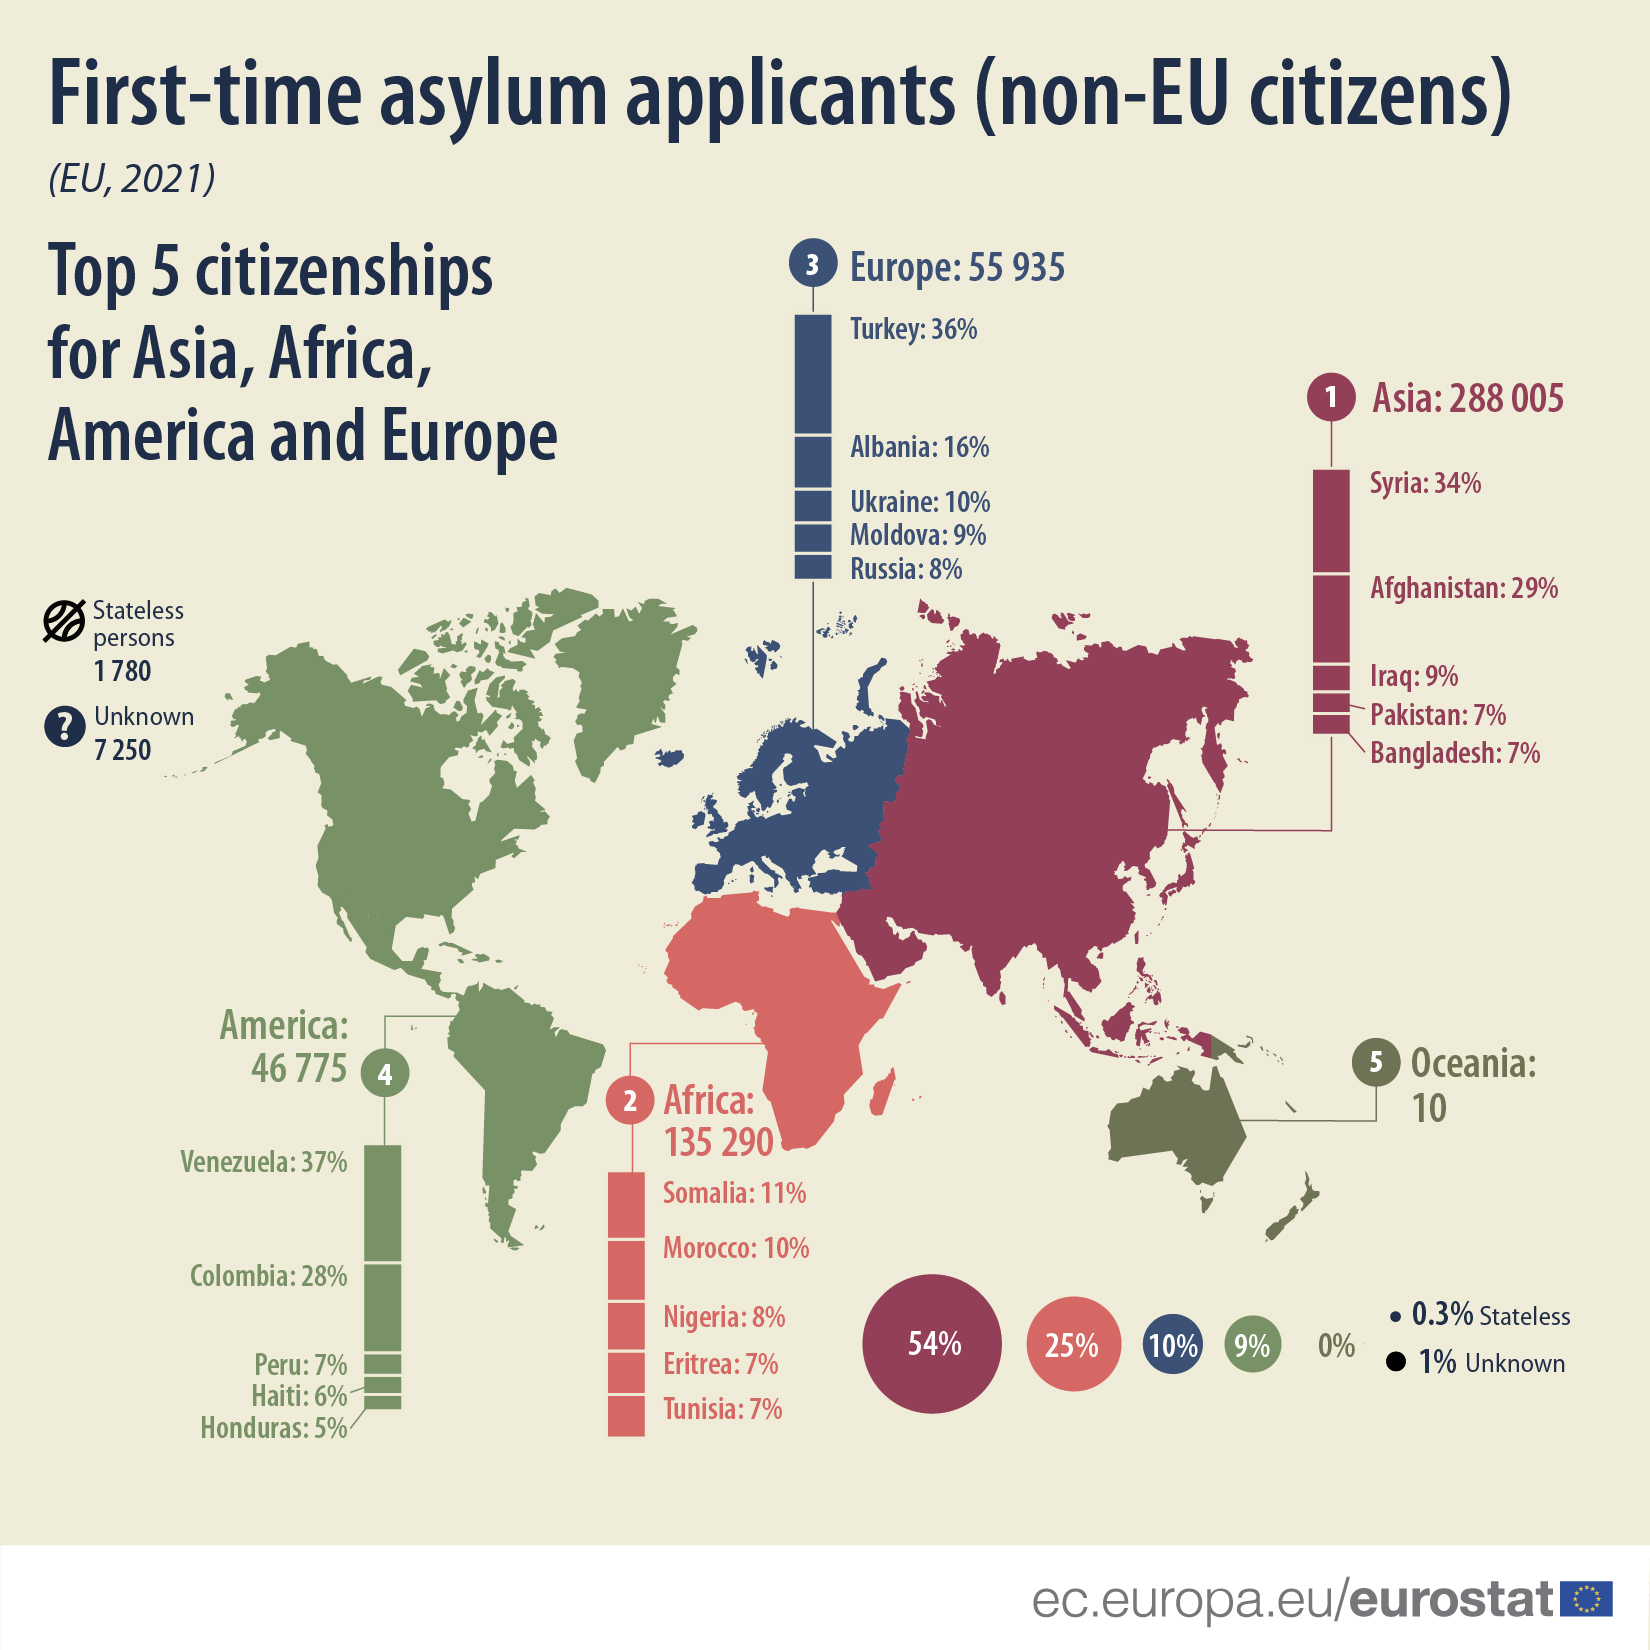 Map: First-time asylum applicants (non-EU citizens), in the EU in 2021, the top 5 citizenships for Asia, Africa, America and Europe, as well as stateless and unknown persons